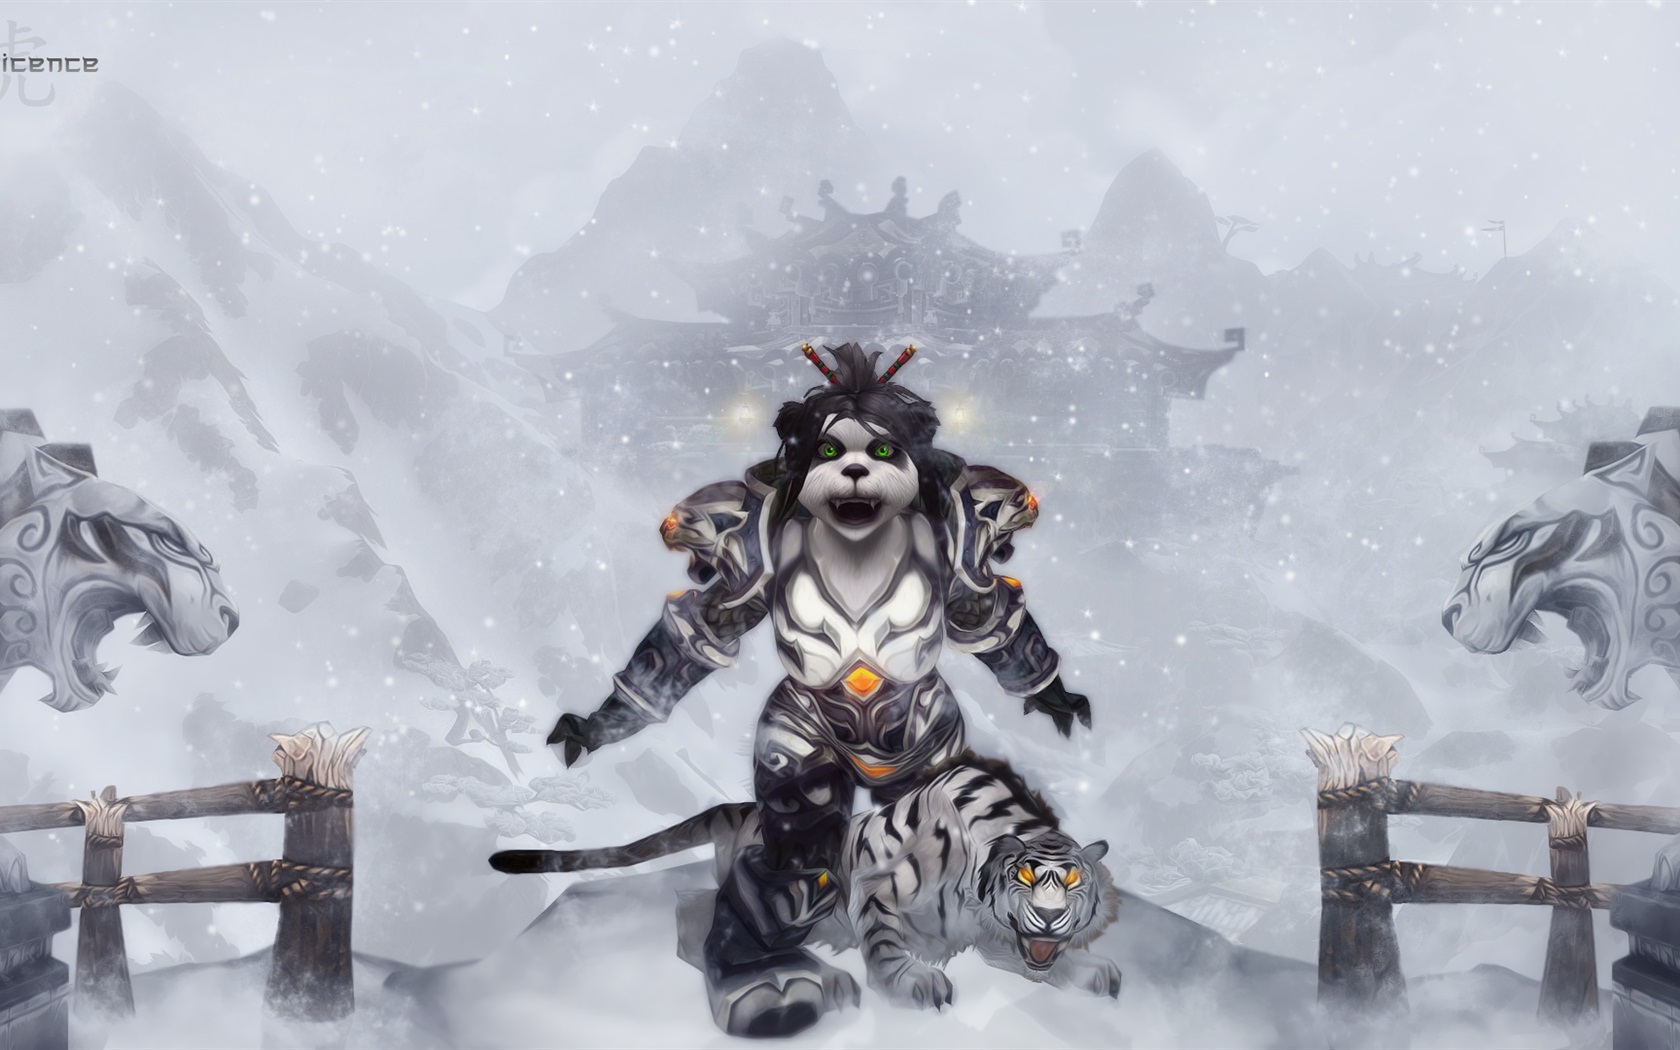 World of Warcraft: Mists of Pandaria HD wallpapers #4 - 1680x1050